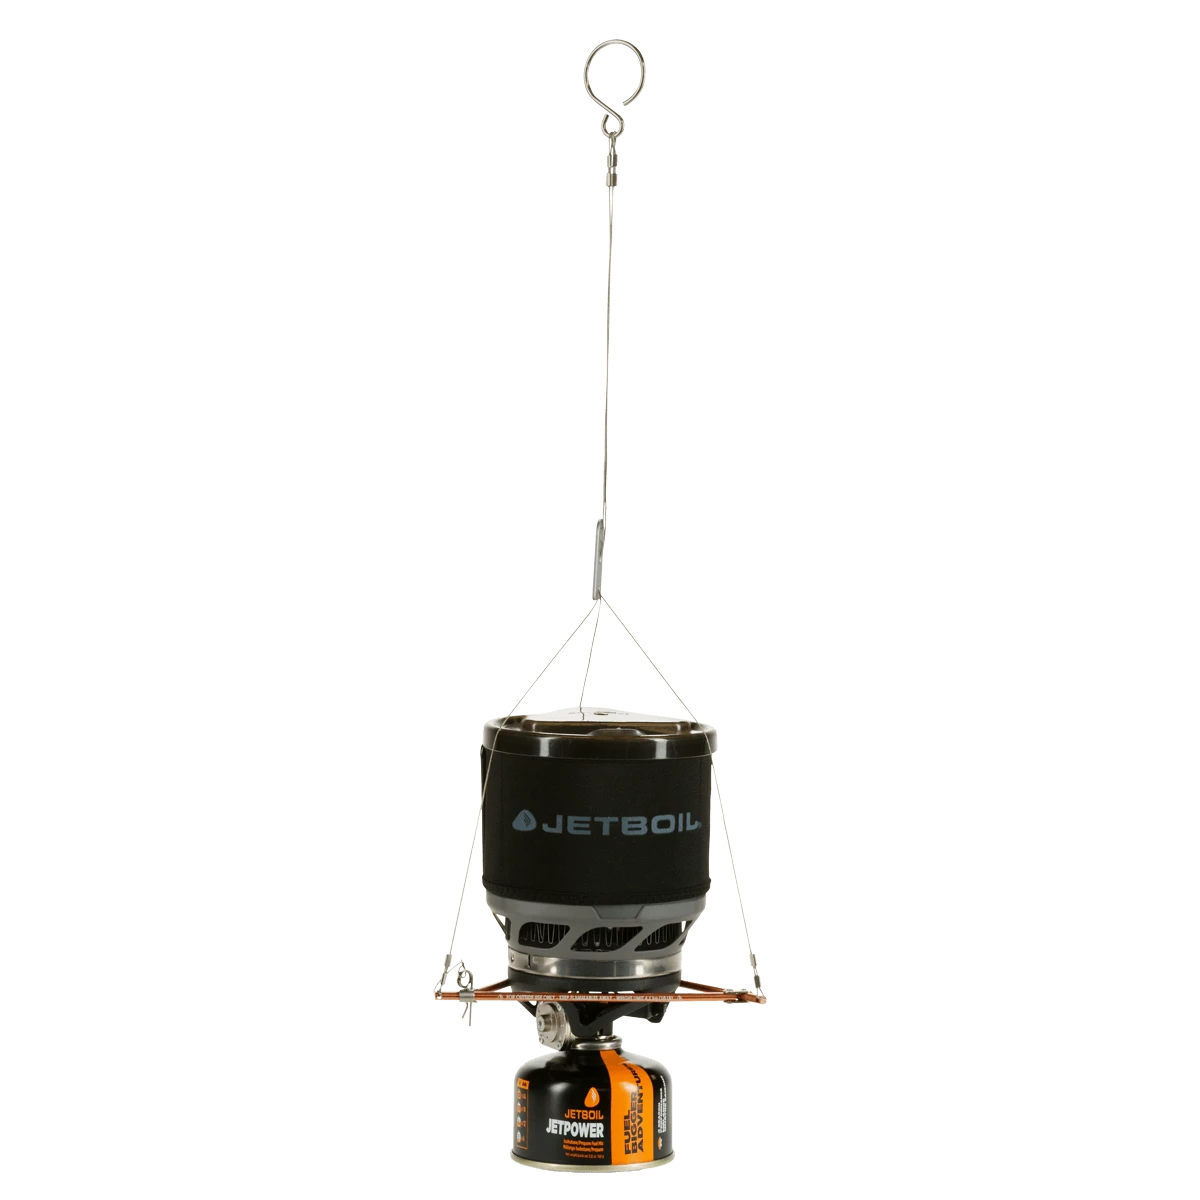 Hanging Kit shown with Jetboil cooking system